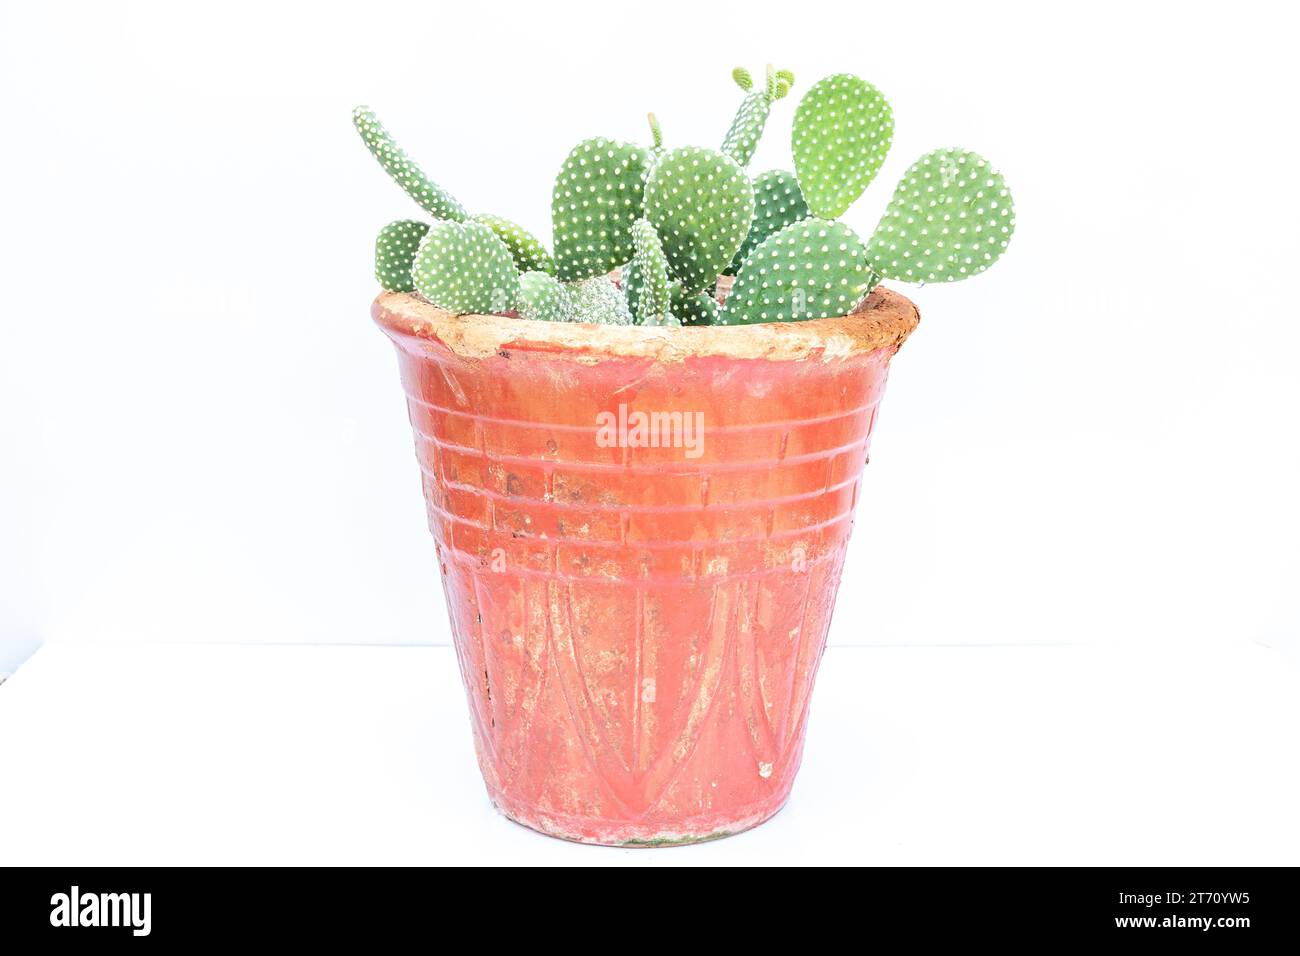 White bunny ears cactus or Polka-dot cactus Opuntia microdasys in a red clay pot isolated on white background Stock Photo